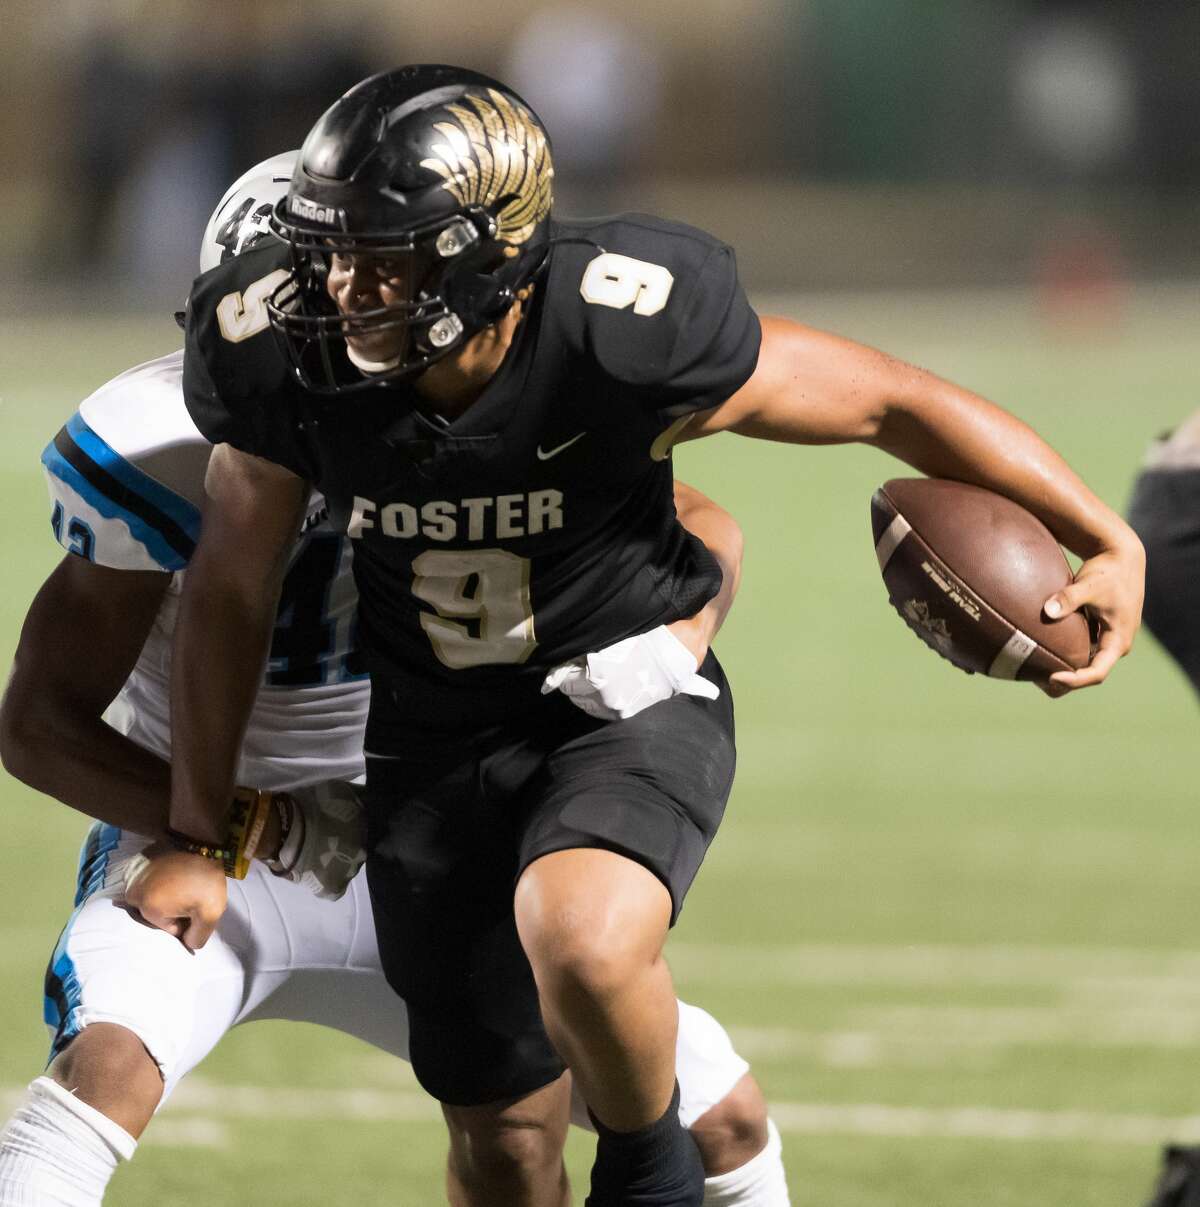 Issac Johnson (9) of the Foster Falcons runs for a short gain in the second half against the Shadow Creek Sharks in a high school football game on Thursday, October 24, 2019 at Traylor Stadium in Rosenberg Texas.